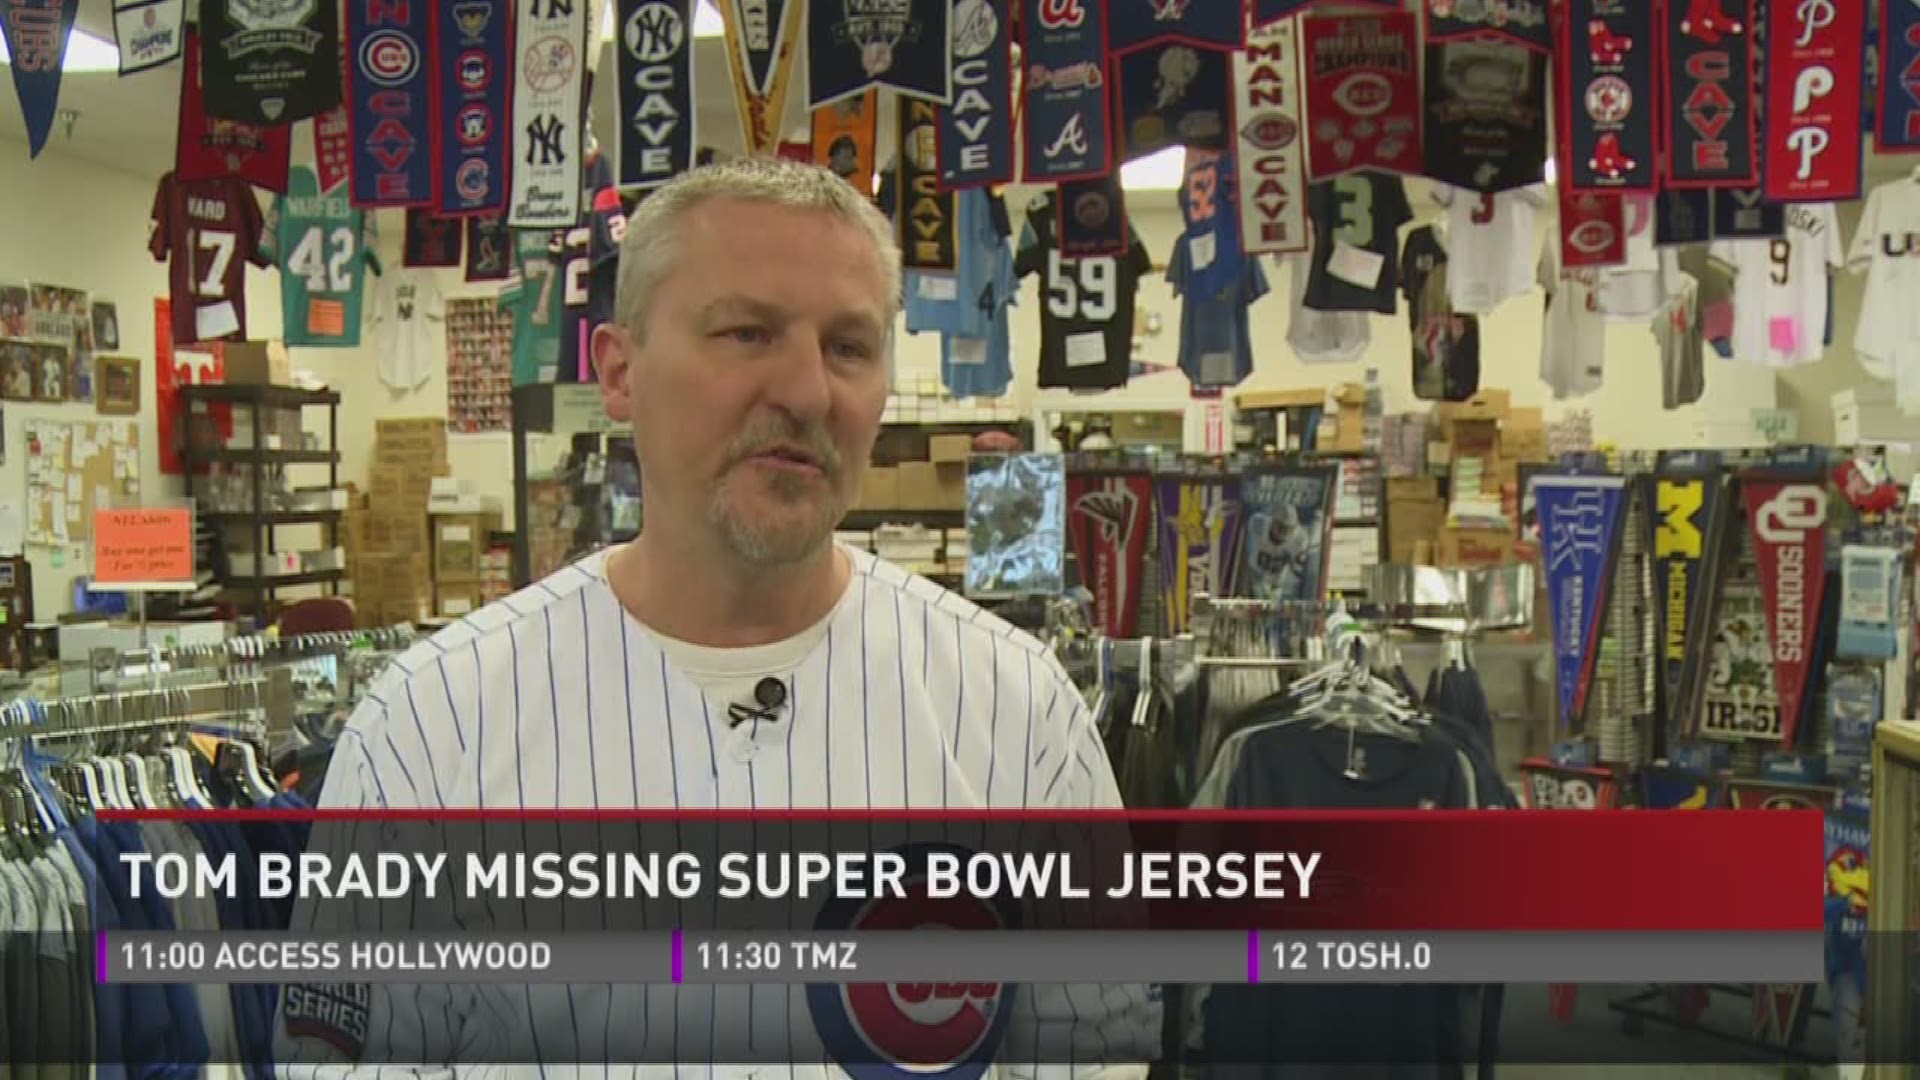 A local expert explains how much Tom Brady's stolen Super Bowl jersey is likley worth.